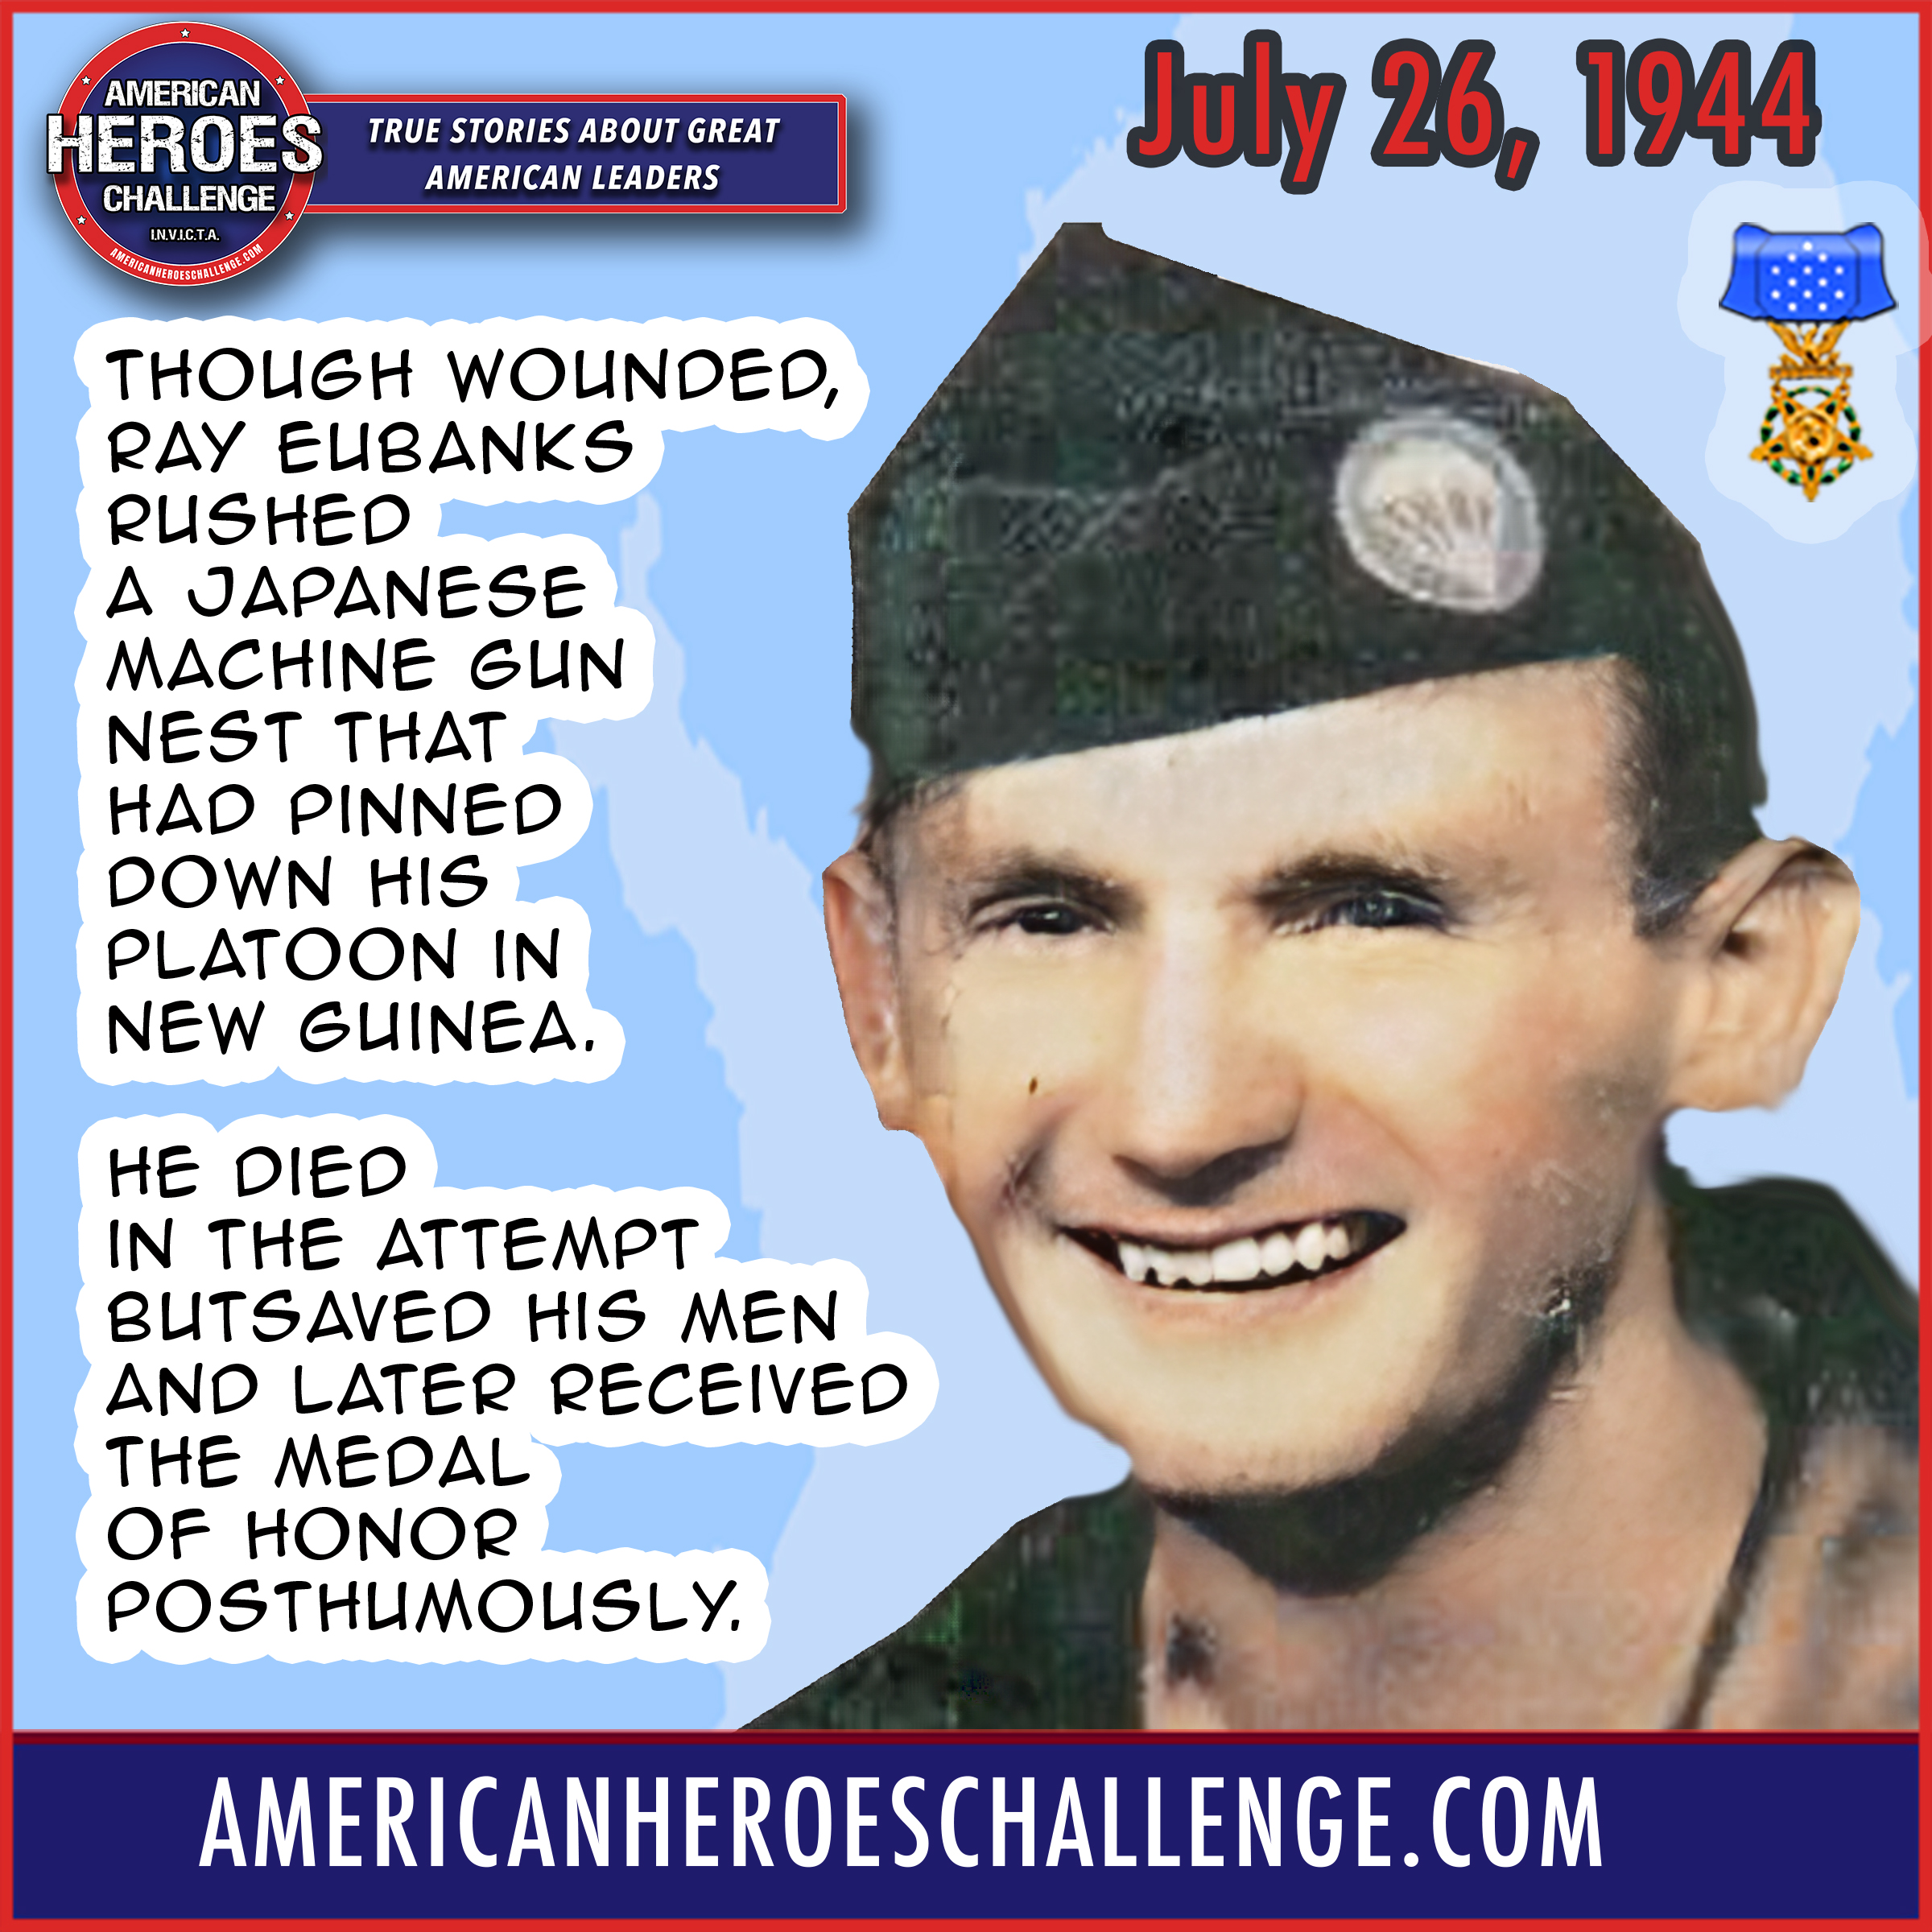 Featured image for “July 26 Ray Eubanks Medal of Honor”